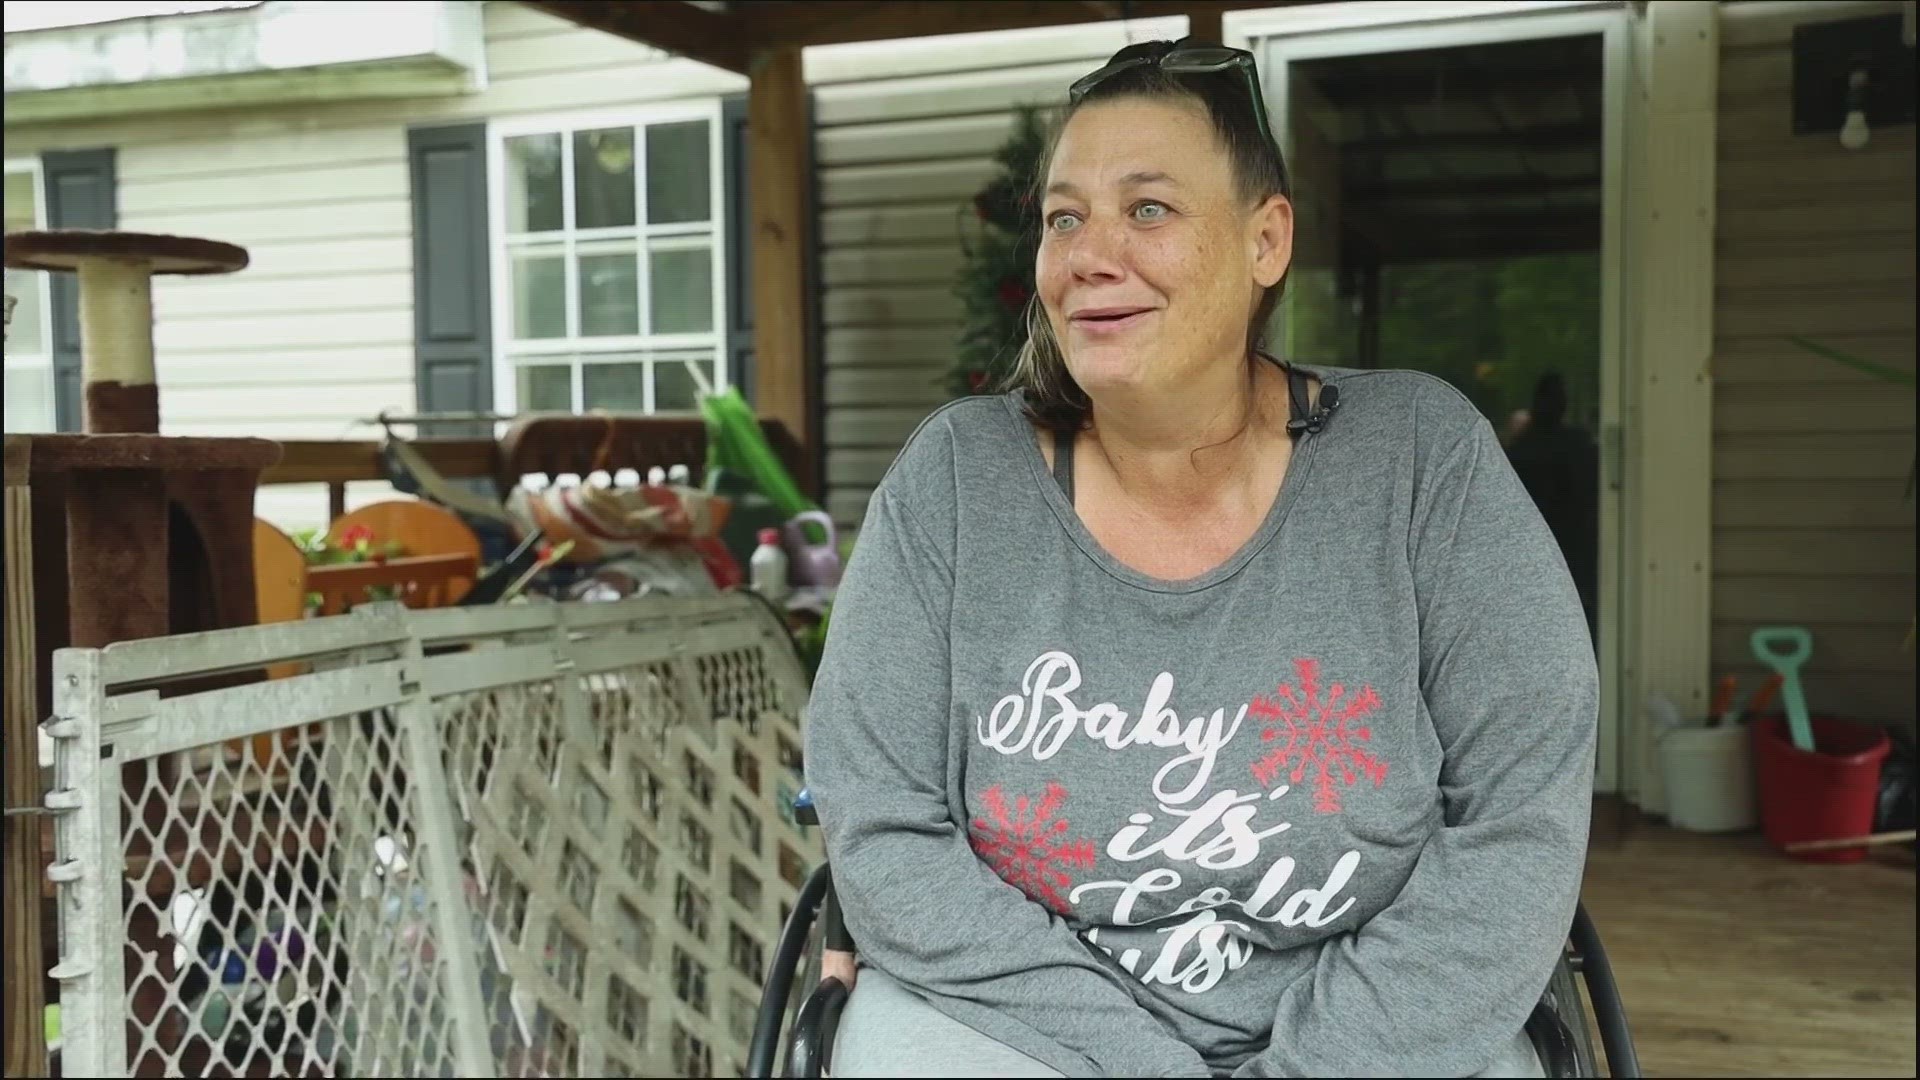 She was in need of an outdoor wheelchair ramp for her home. Roughly 18 years ago, she was hit by a drunk driver while riding on a motorcycle.